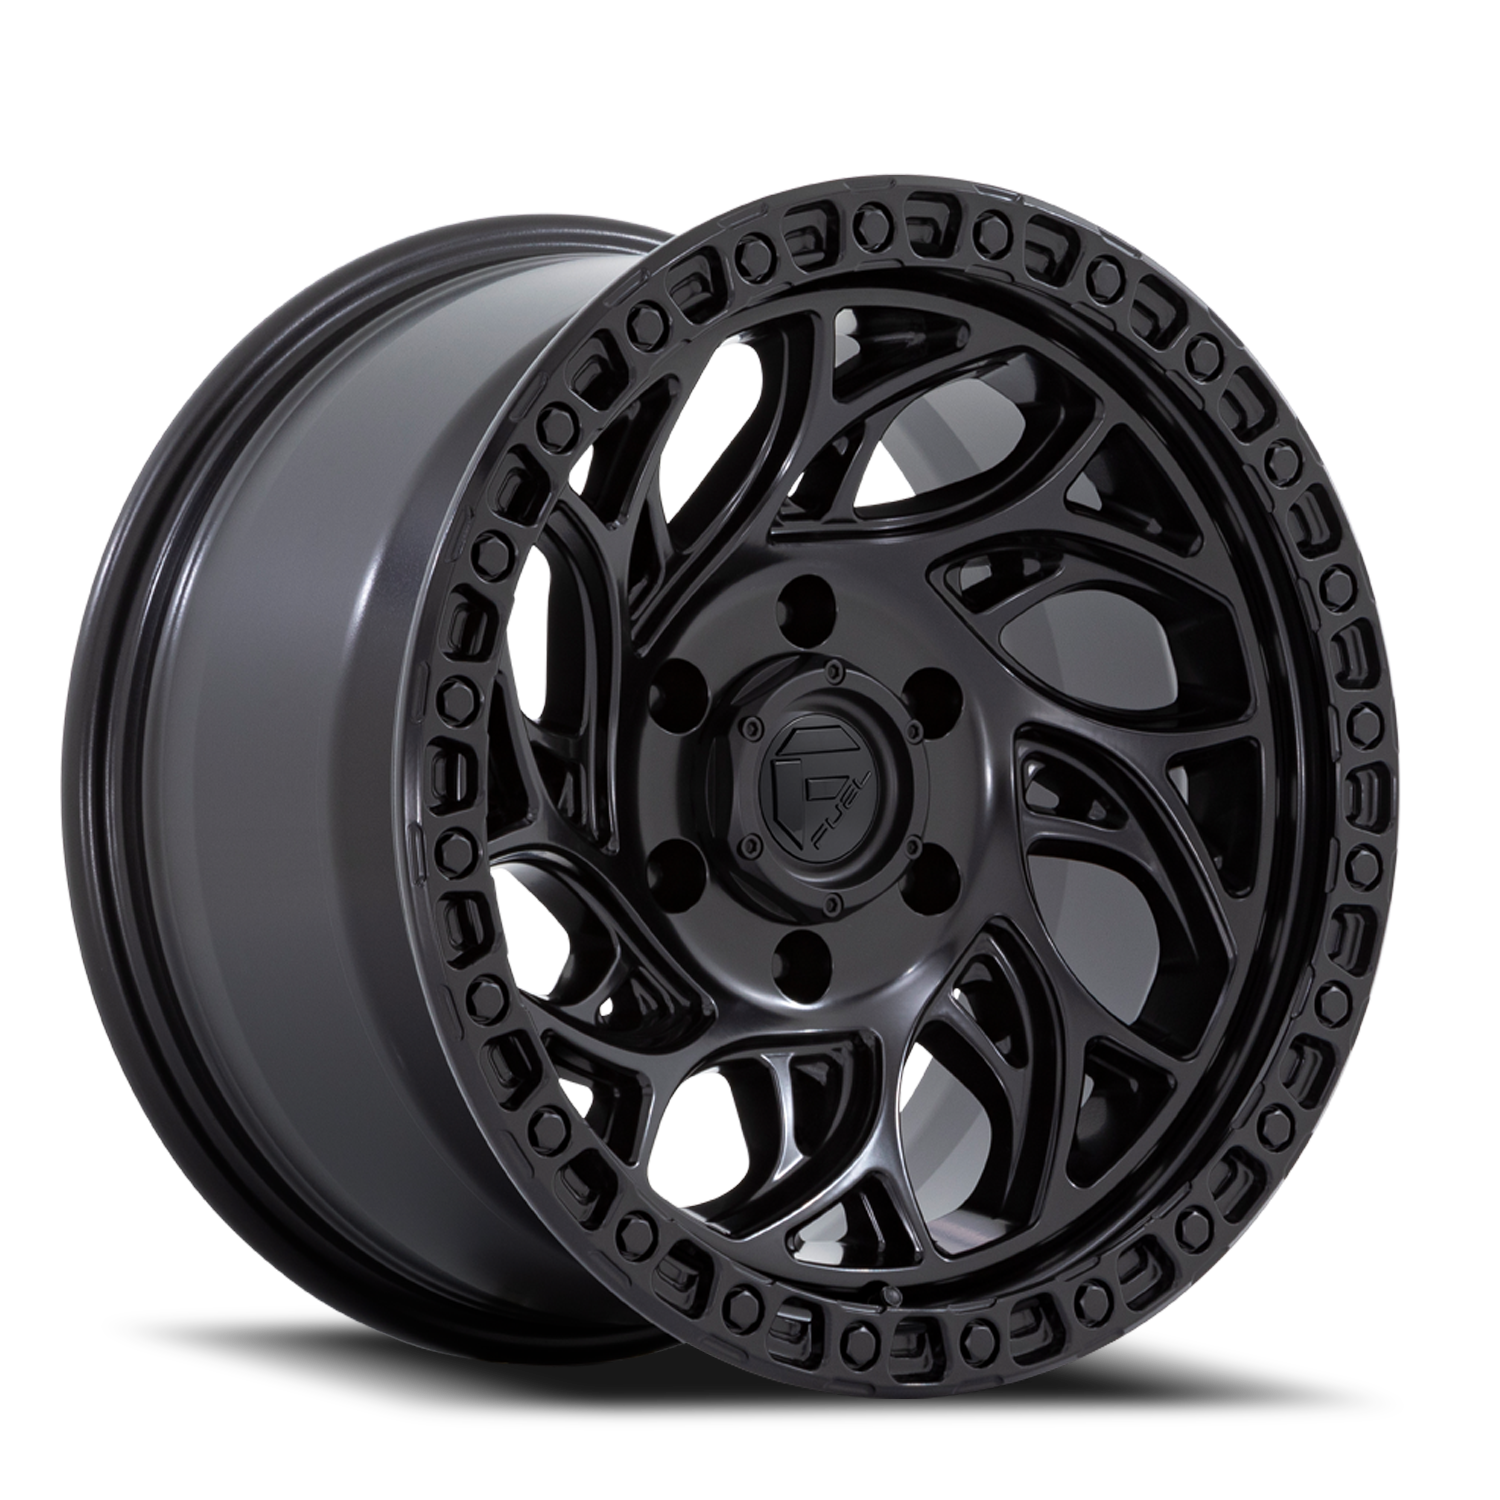 Aluminum Wheels 20X9 Runner OR D852 6 On 139.7 Blackout 106.1 Bore 20 Offset Fuel Off Road Wheels